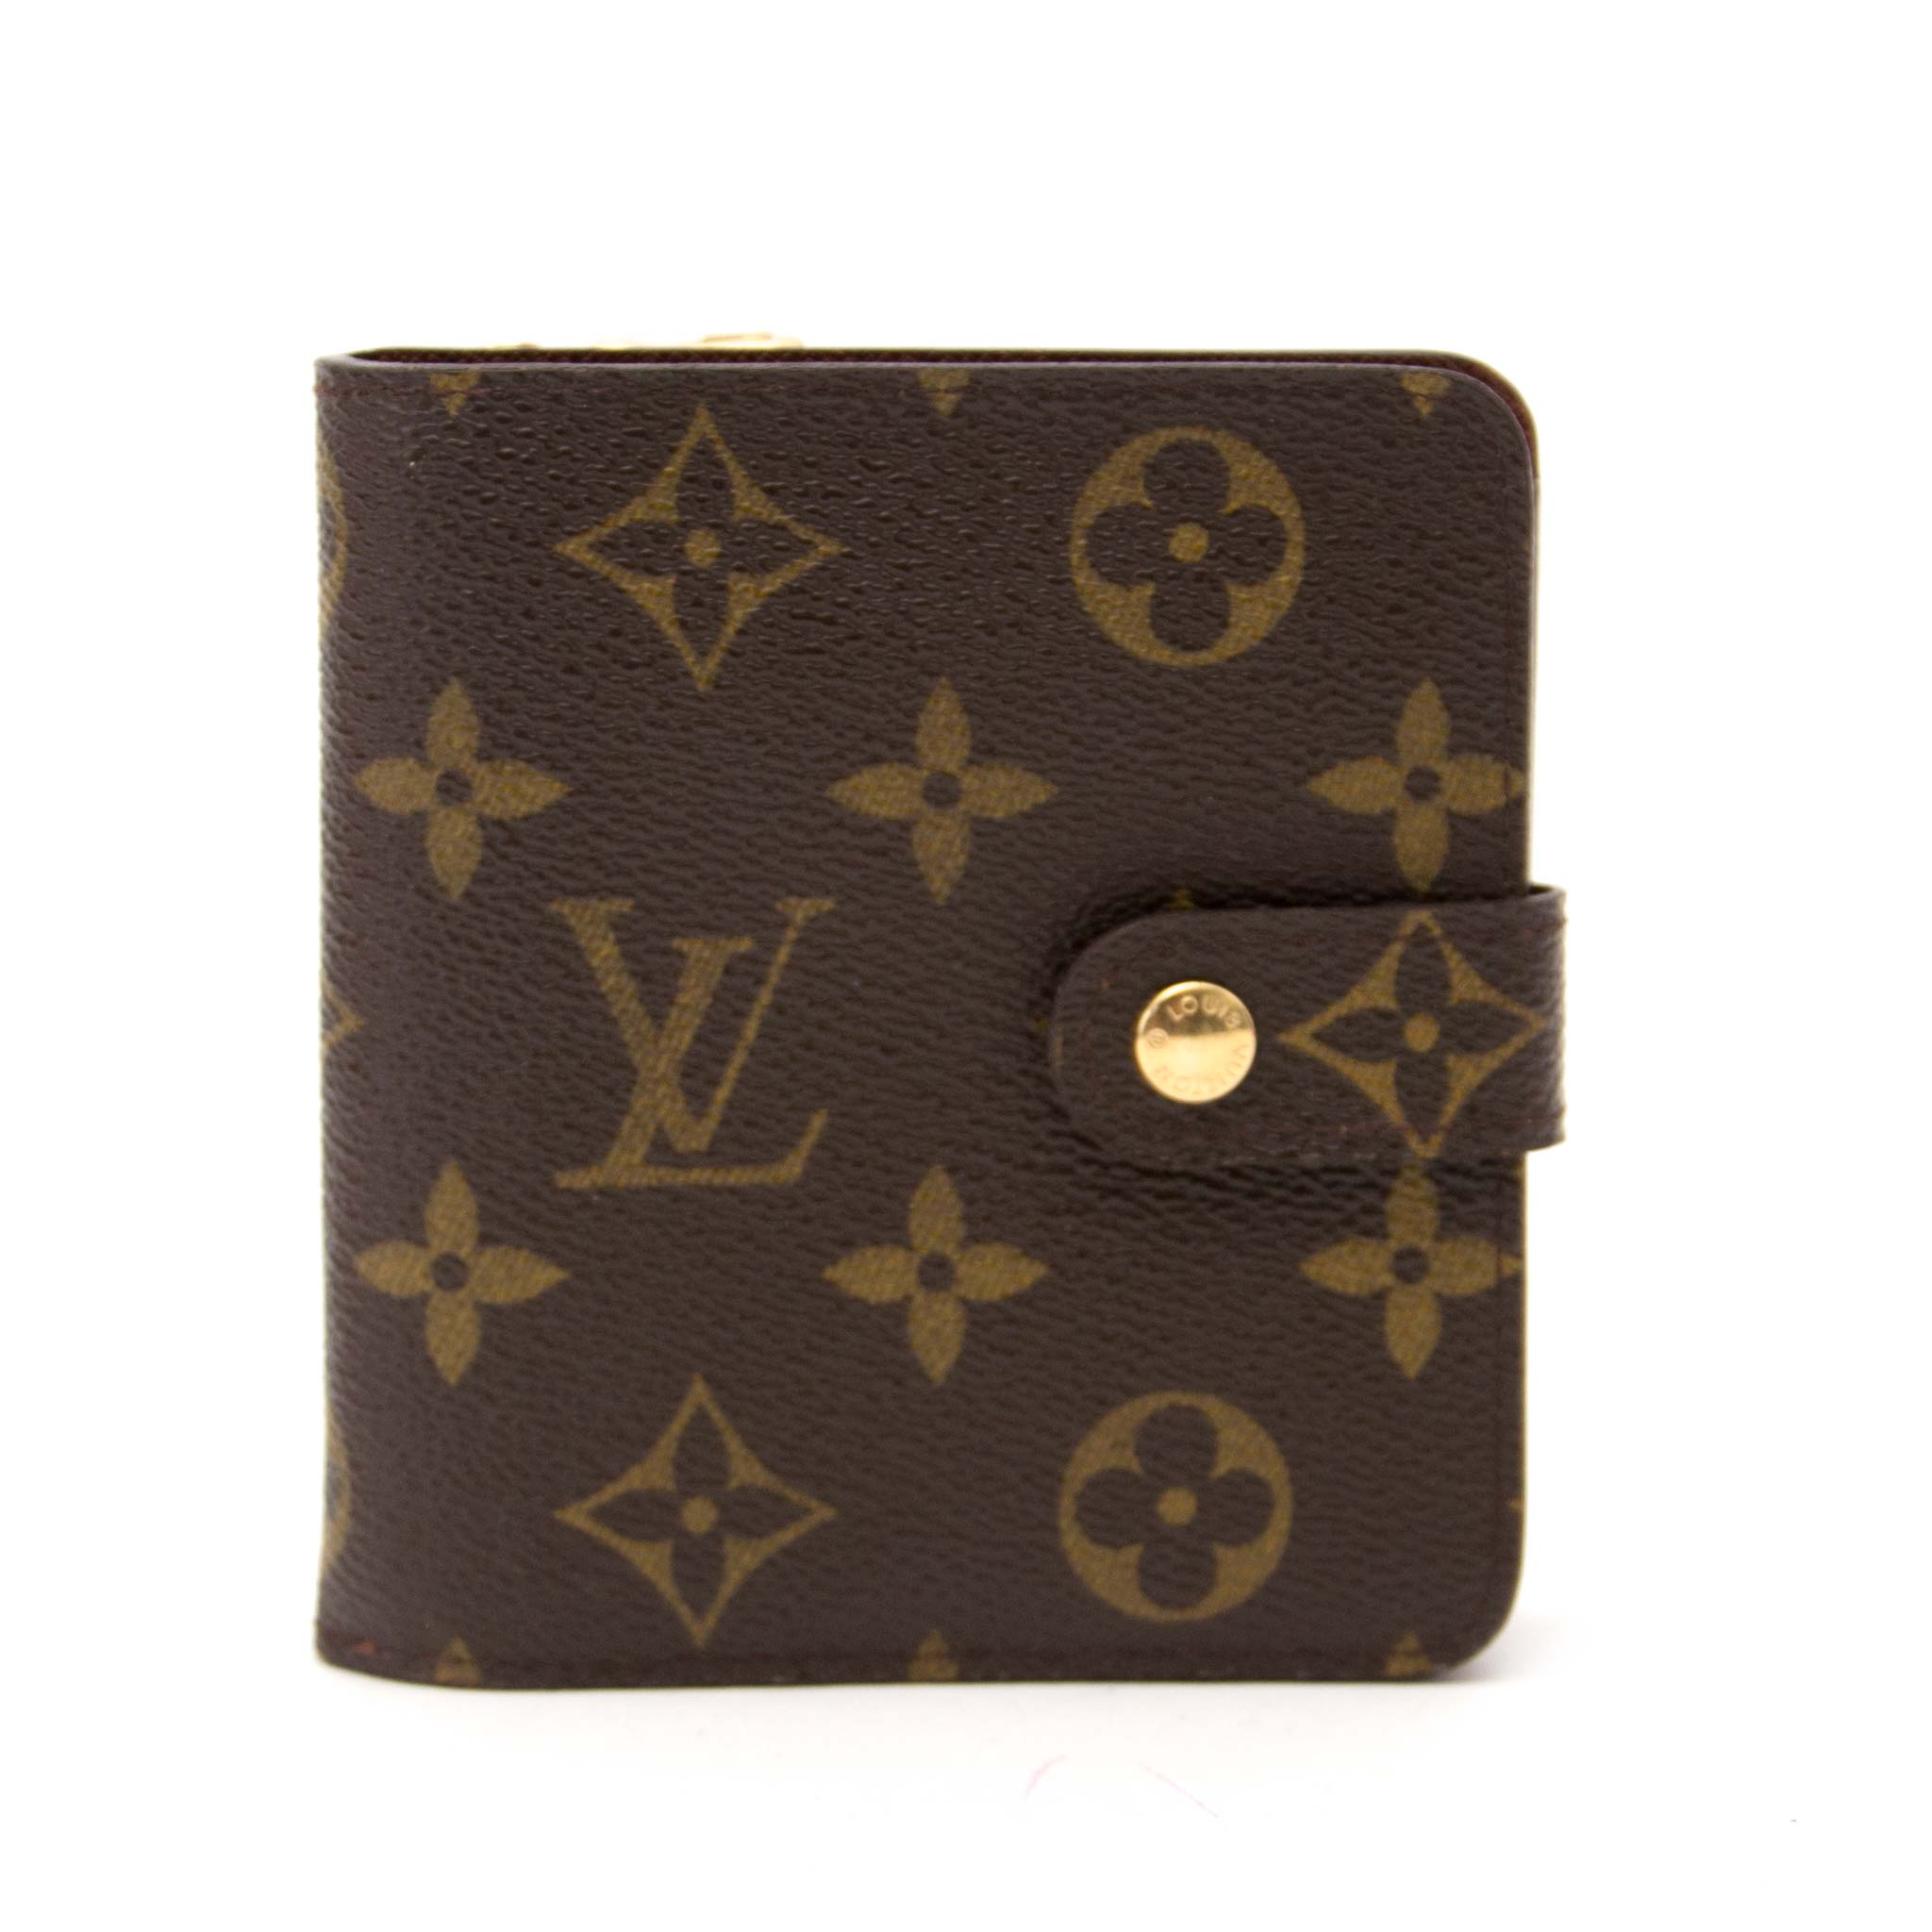 Louis Vuitton Blue Zippy Wallet ○ Labellov ○ Buy and Sell Authentic Luxury